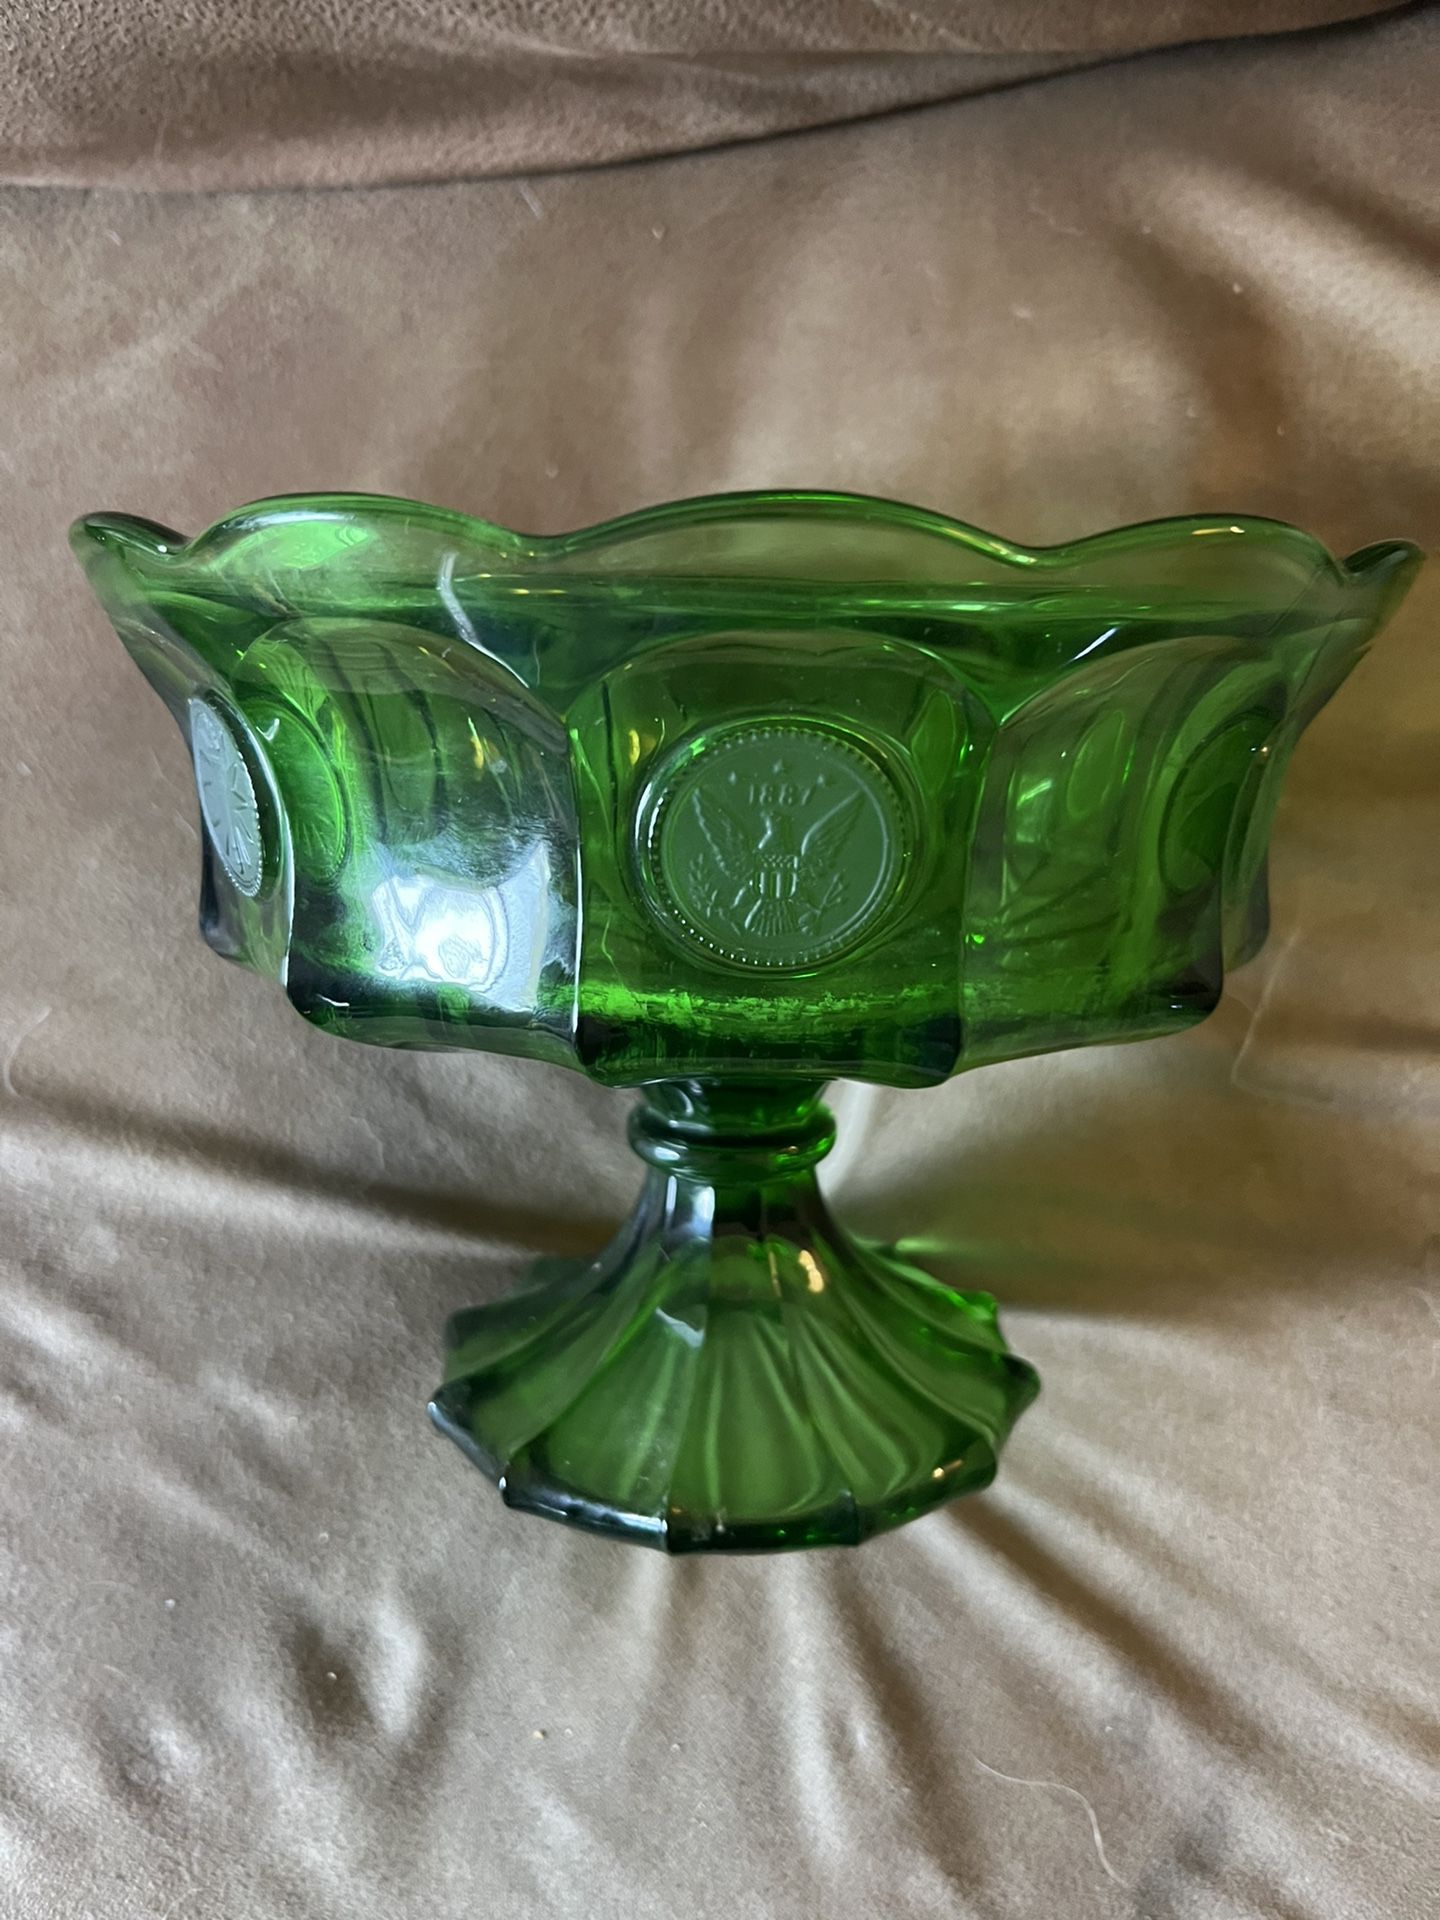 Vintage Fostoria 1887 Candy Compote Dish